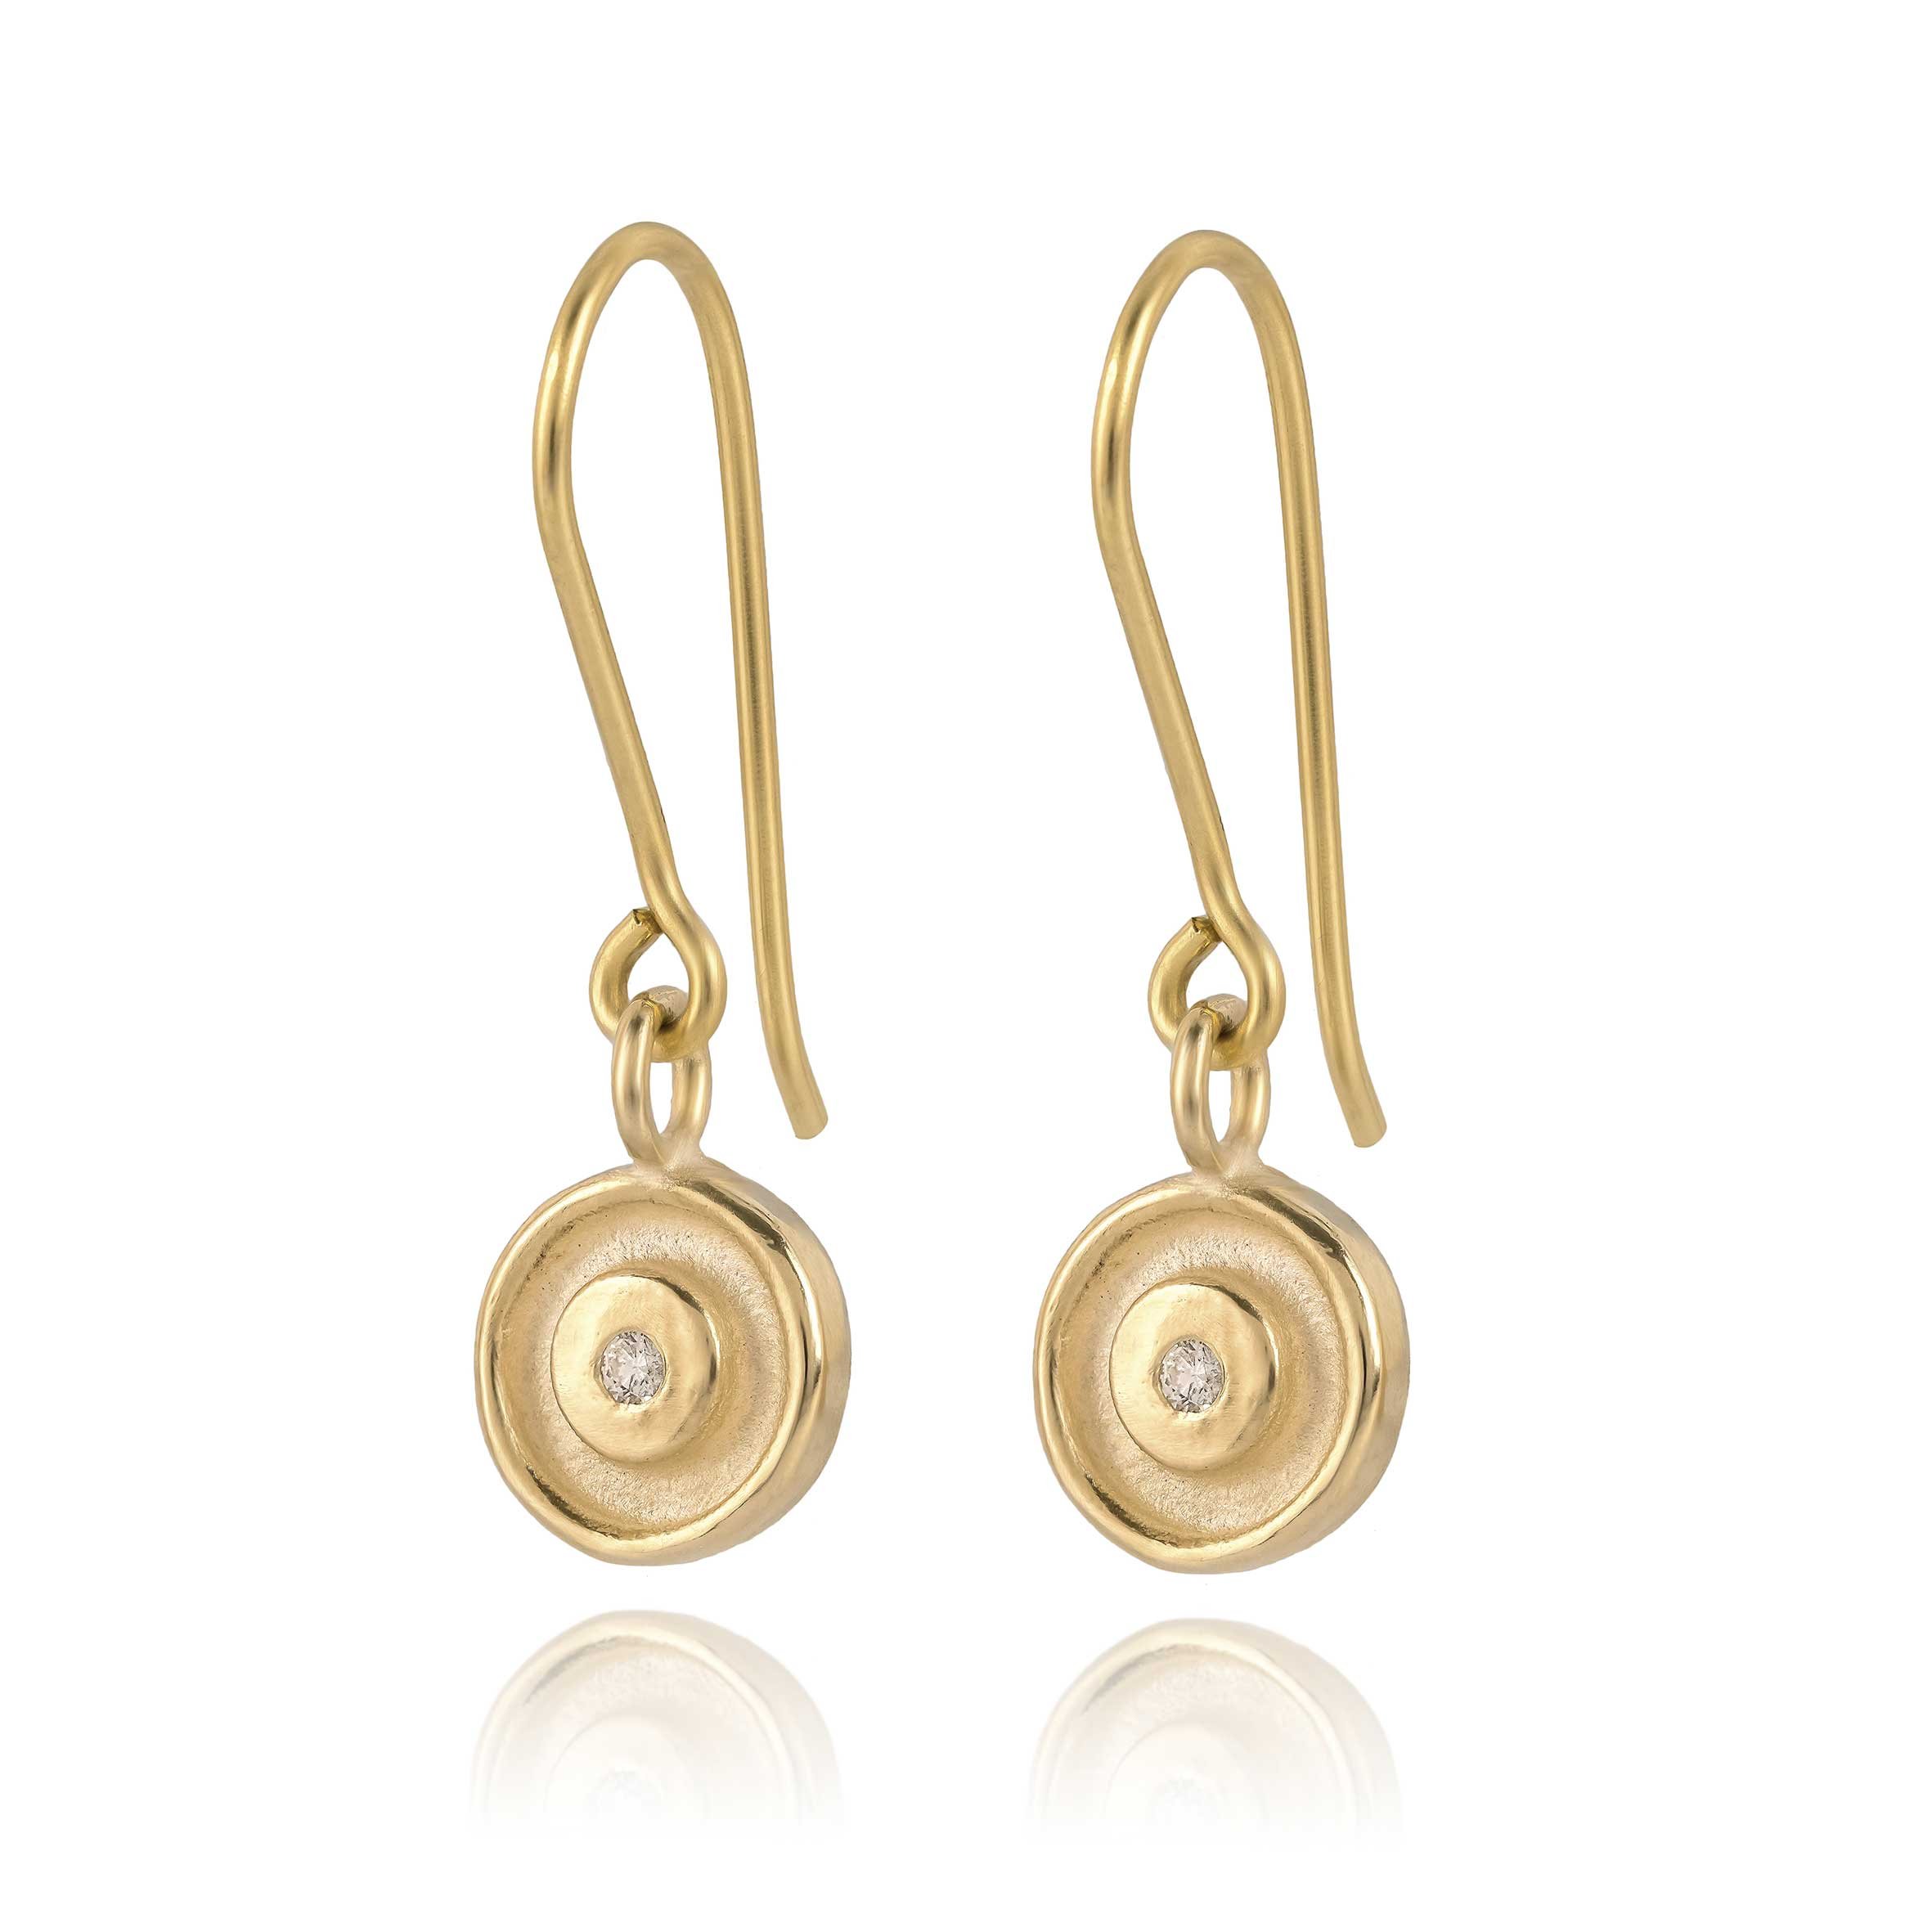 Halogen Fairtrade gold earrings by Hayley Kruger